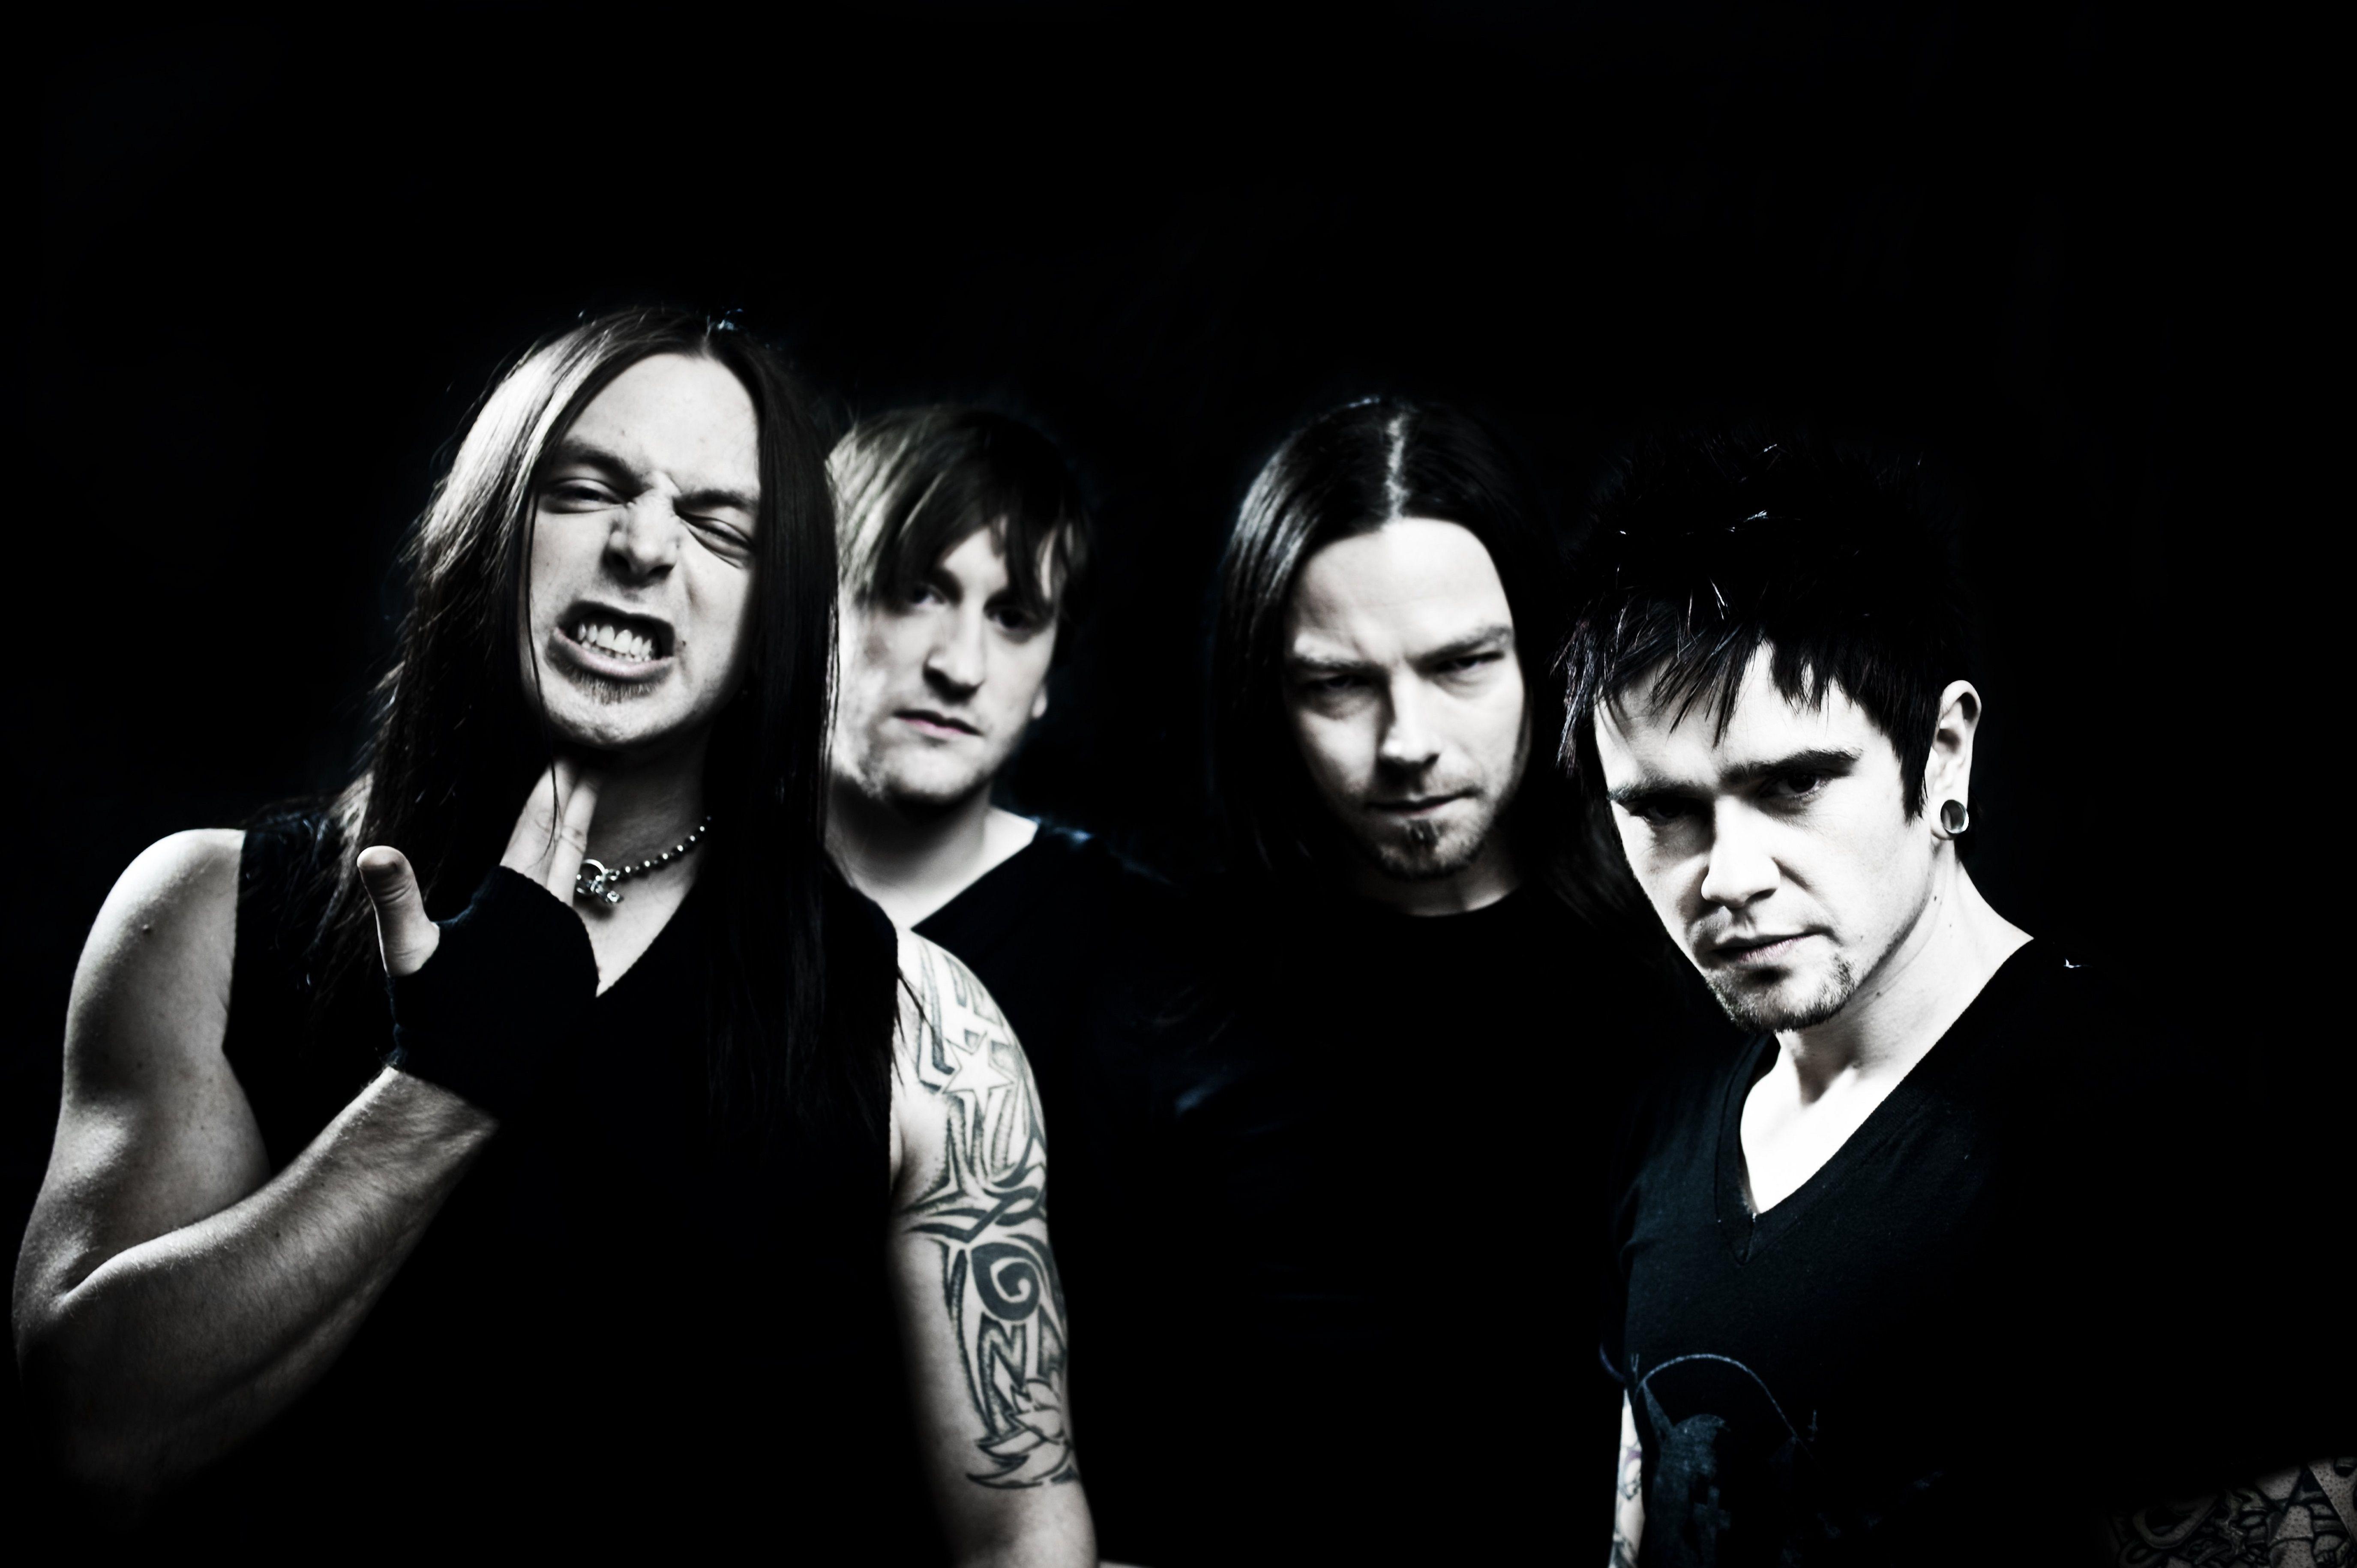 Bullet For My Valentine Wallpapers Top Free Bullet For My Valentine Backgrounds Wallpaperaccess